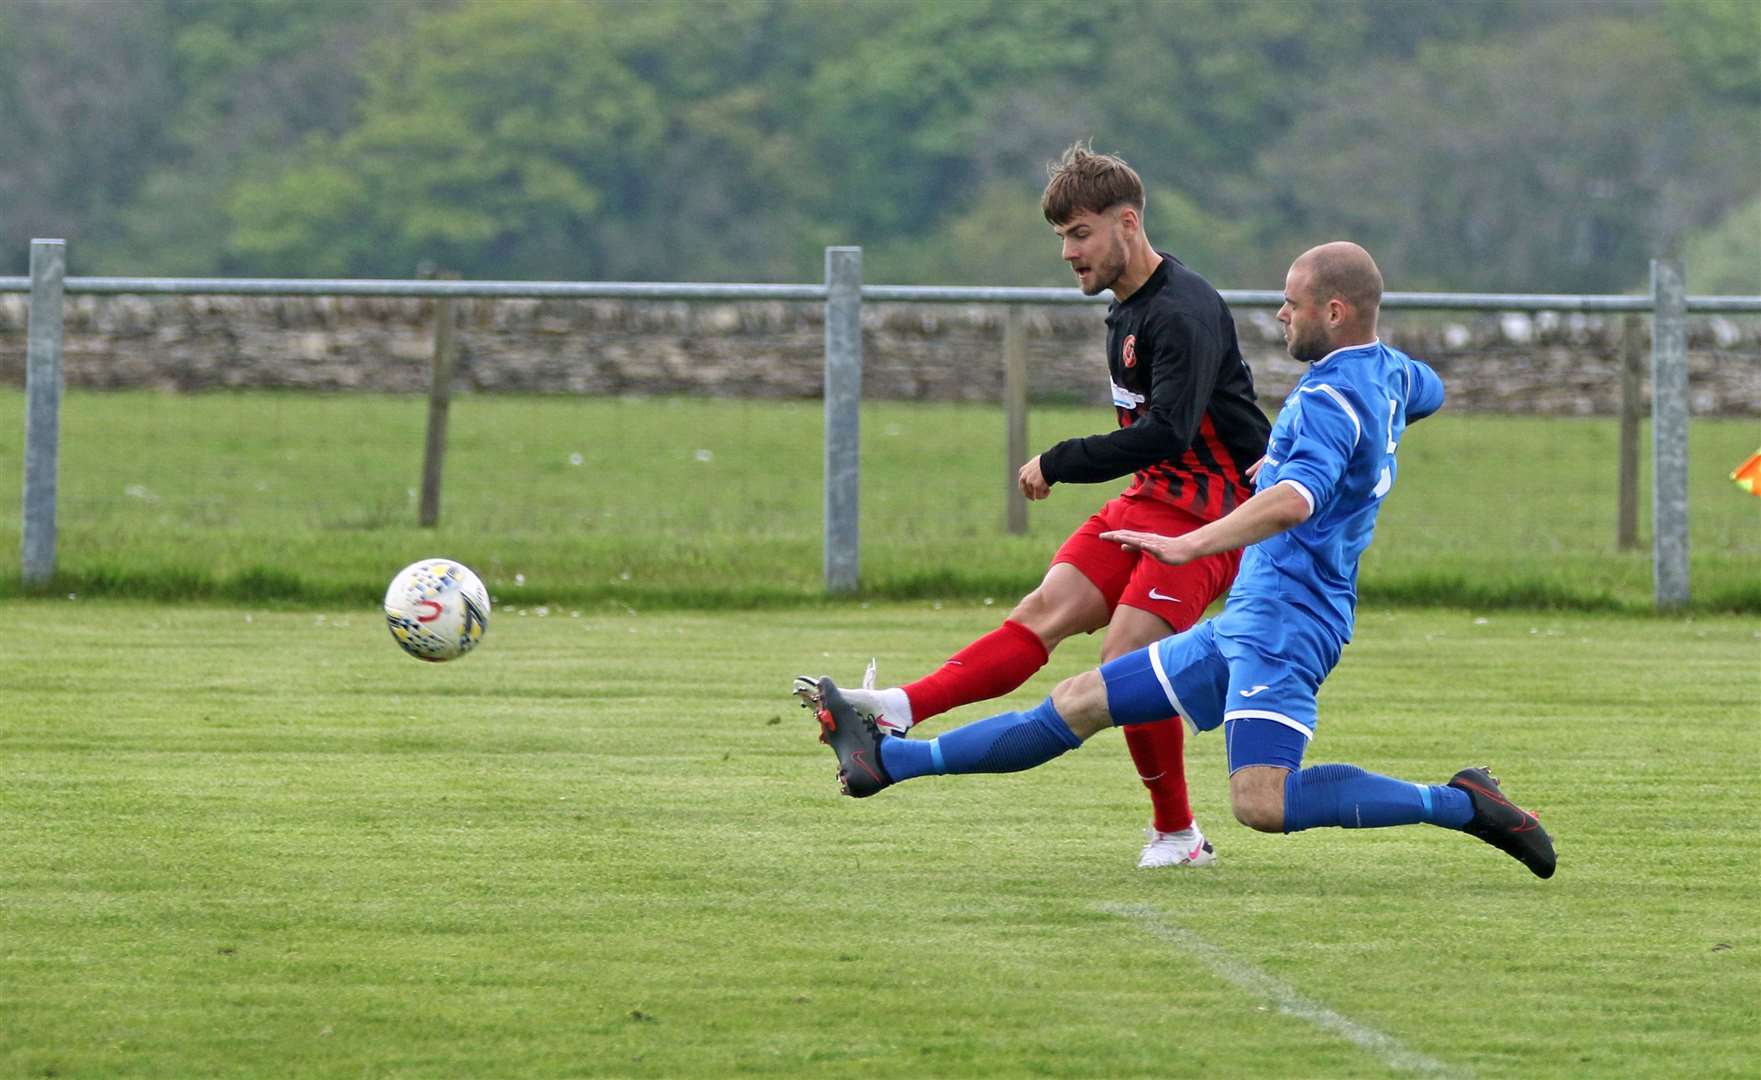 Halkirk United forward Jonah Martens fires a shot past the outstretched Sean Munro of Golspie but it was off target. Picture: James Gunn